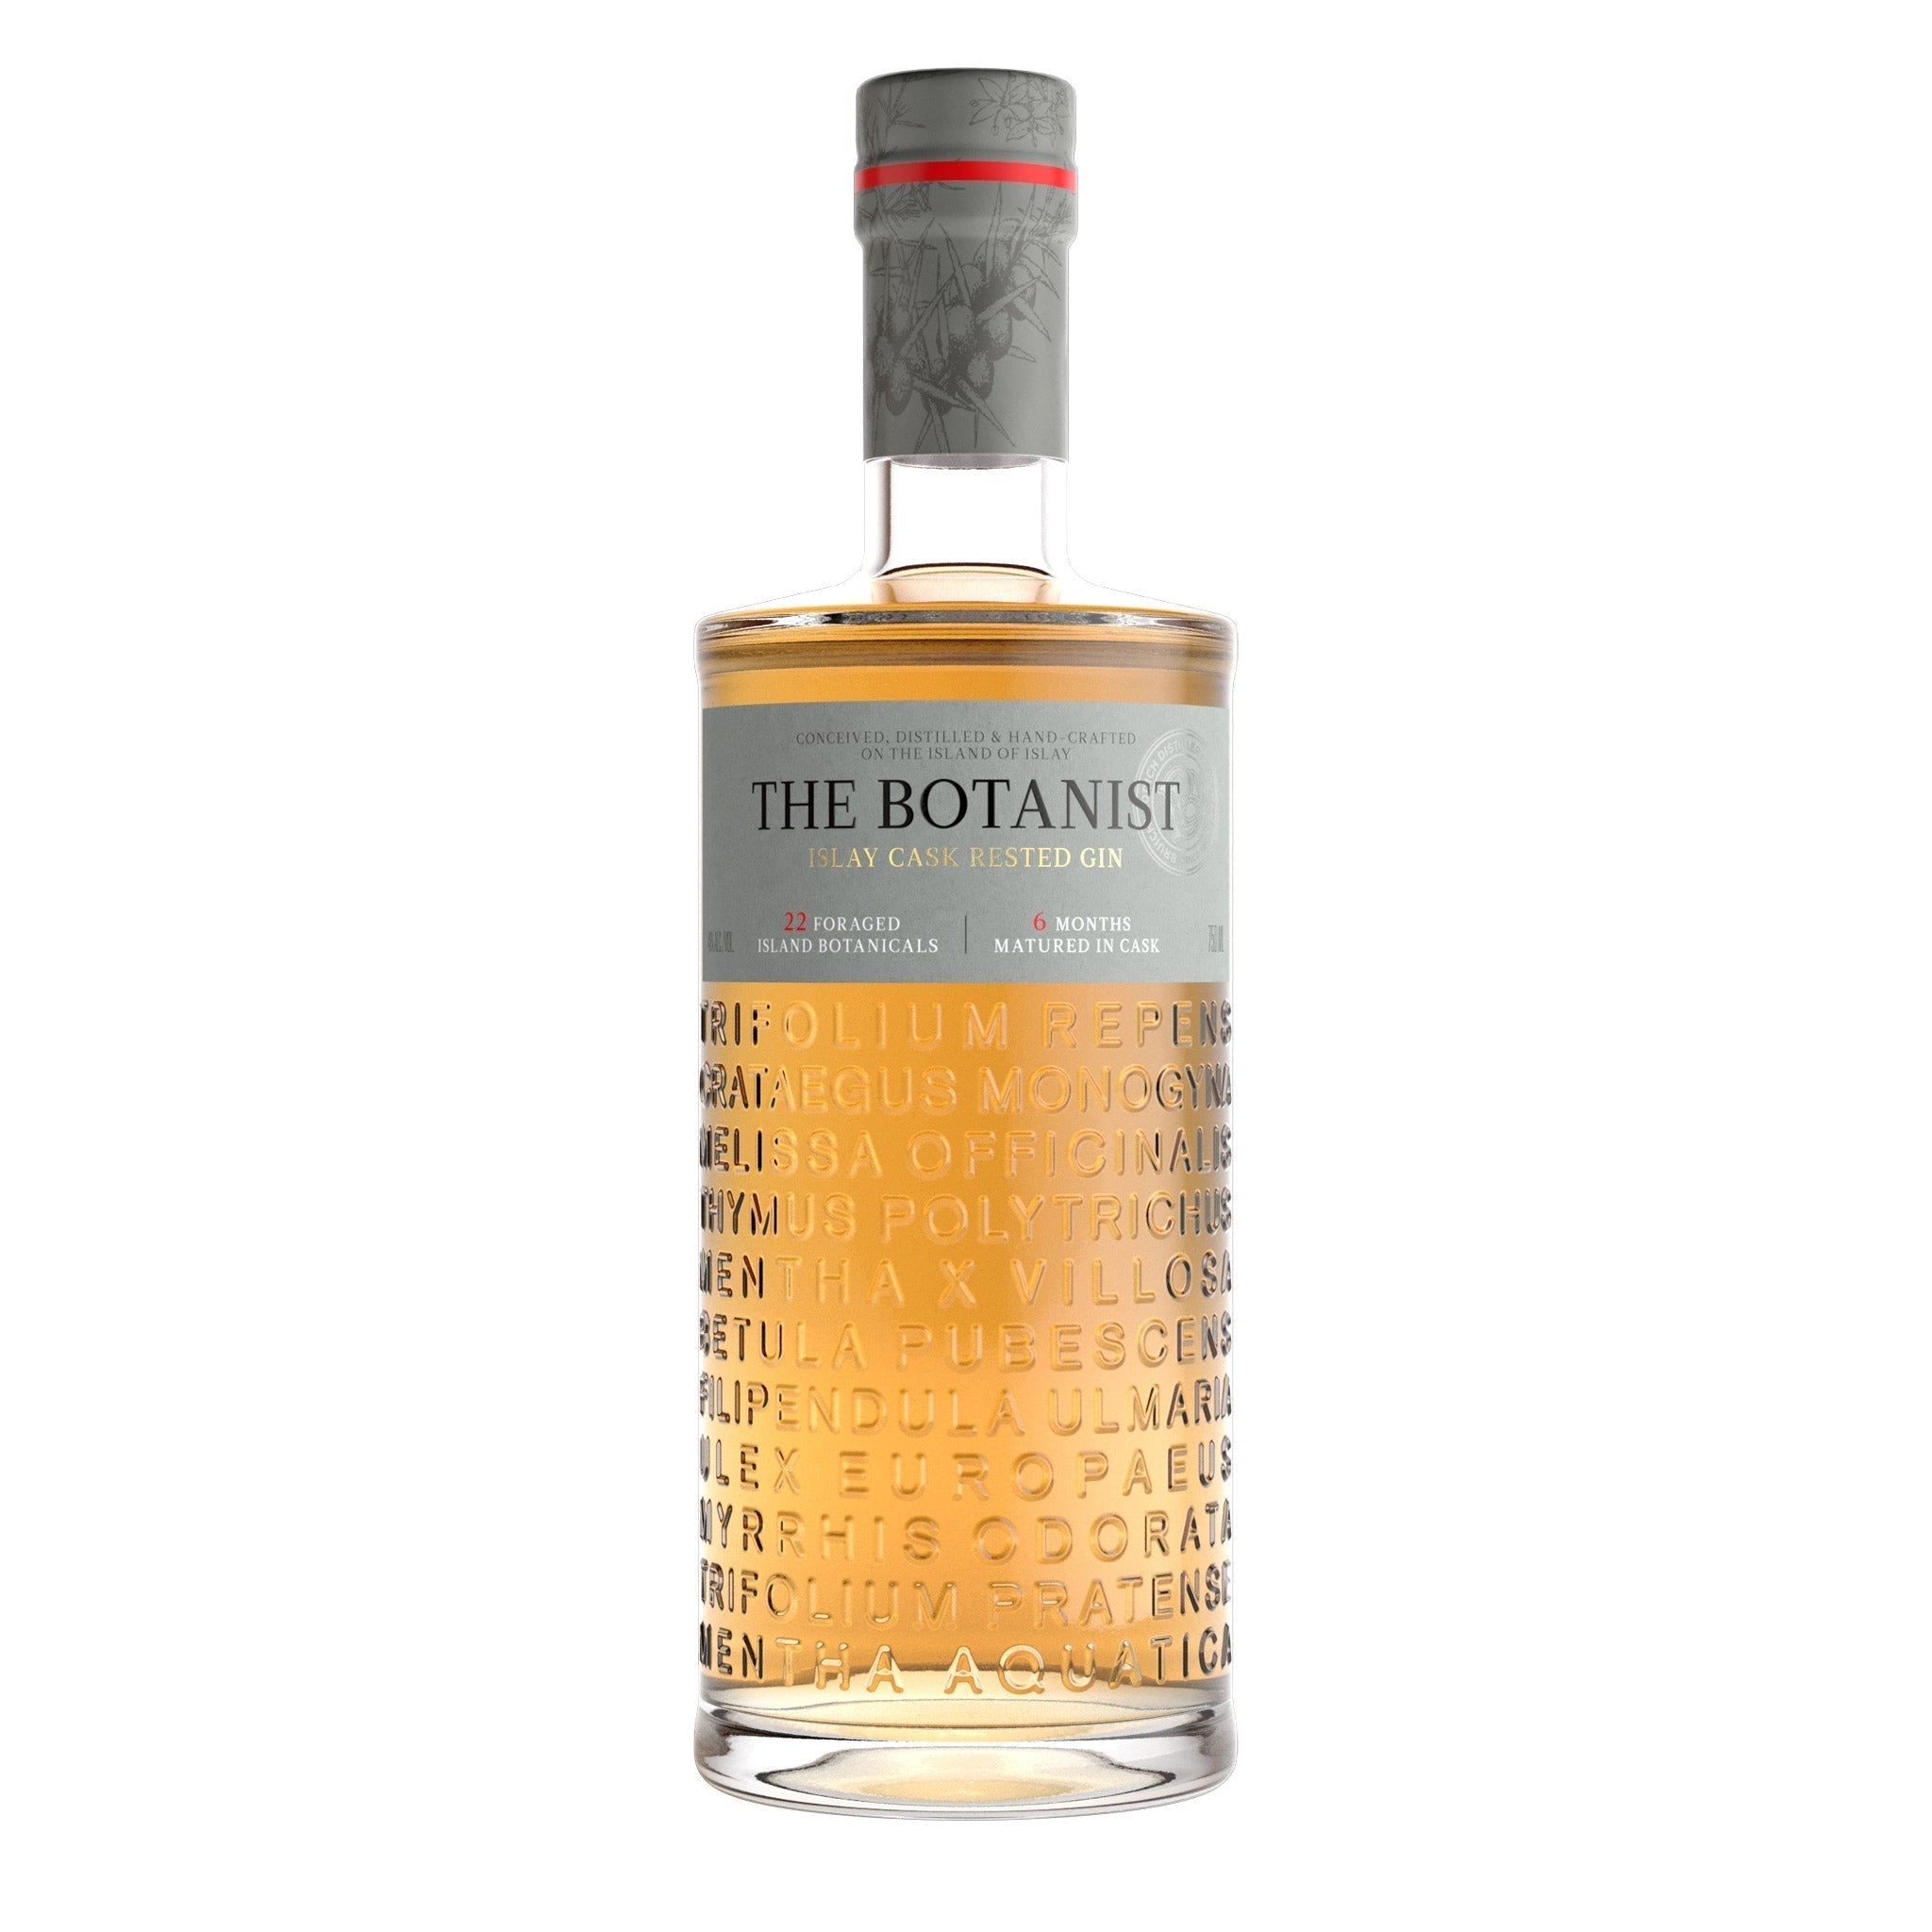 The Botanist Cask Rested Gin Gin Bruichladdich   